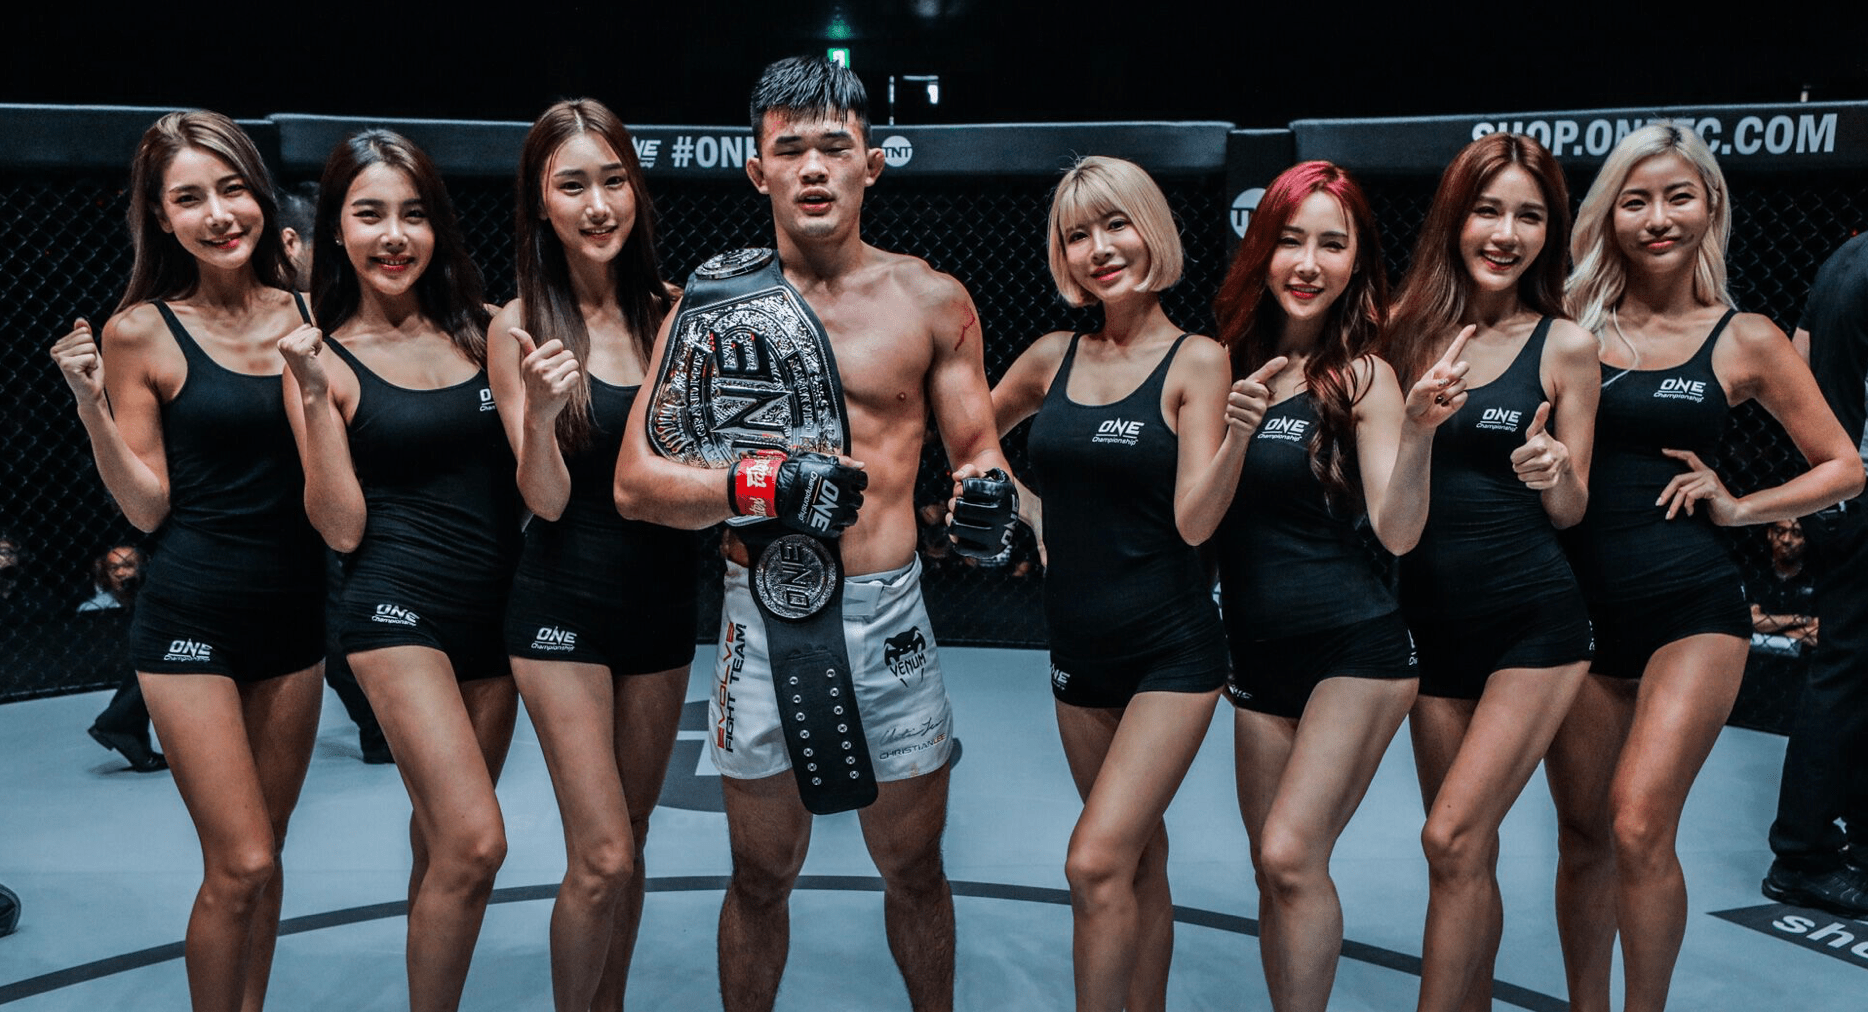 Christian Lee Discusses Who’d He’d Like To Face Next